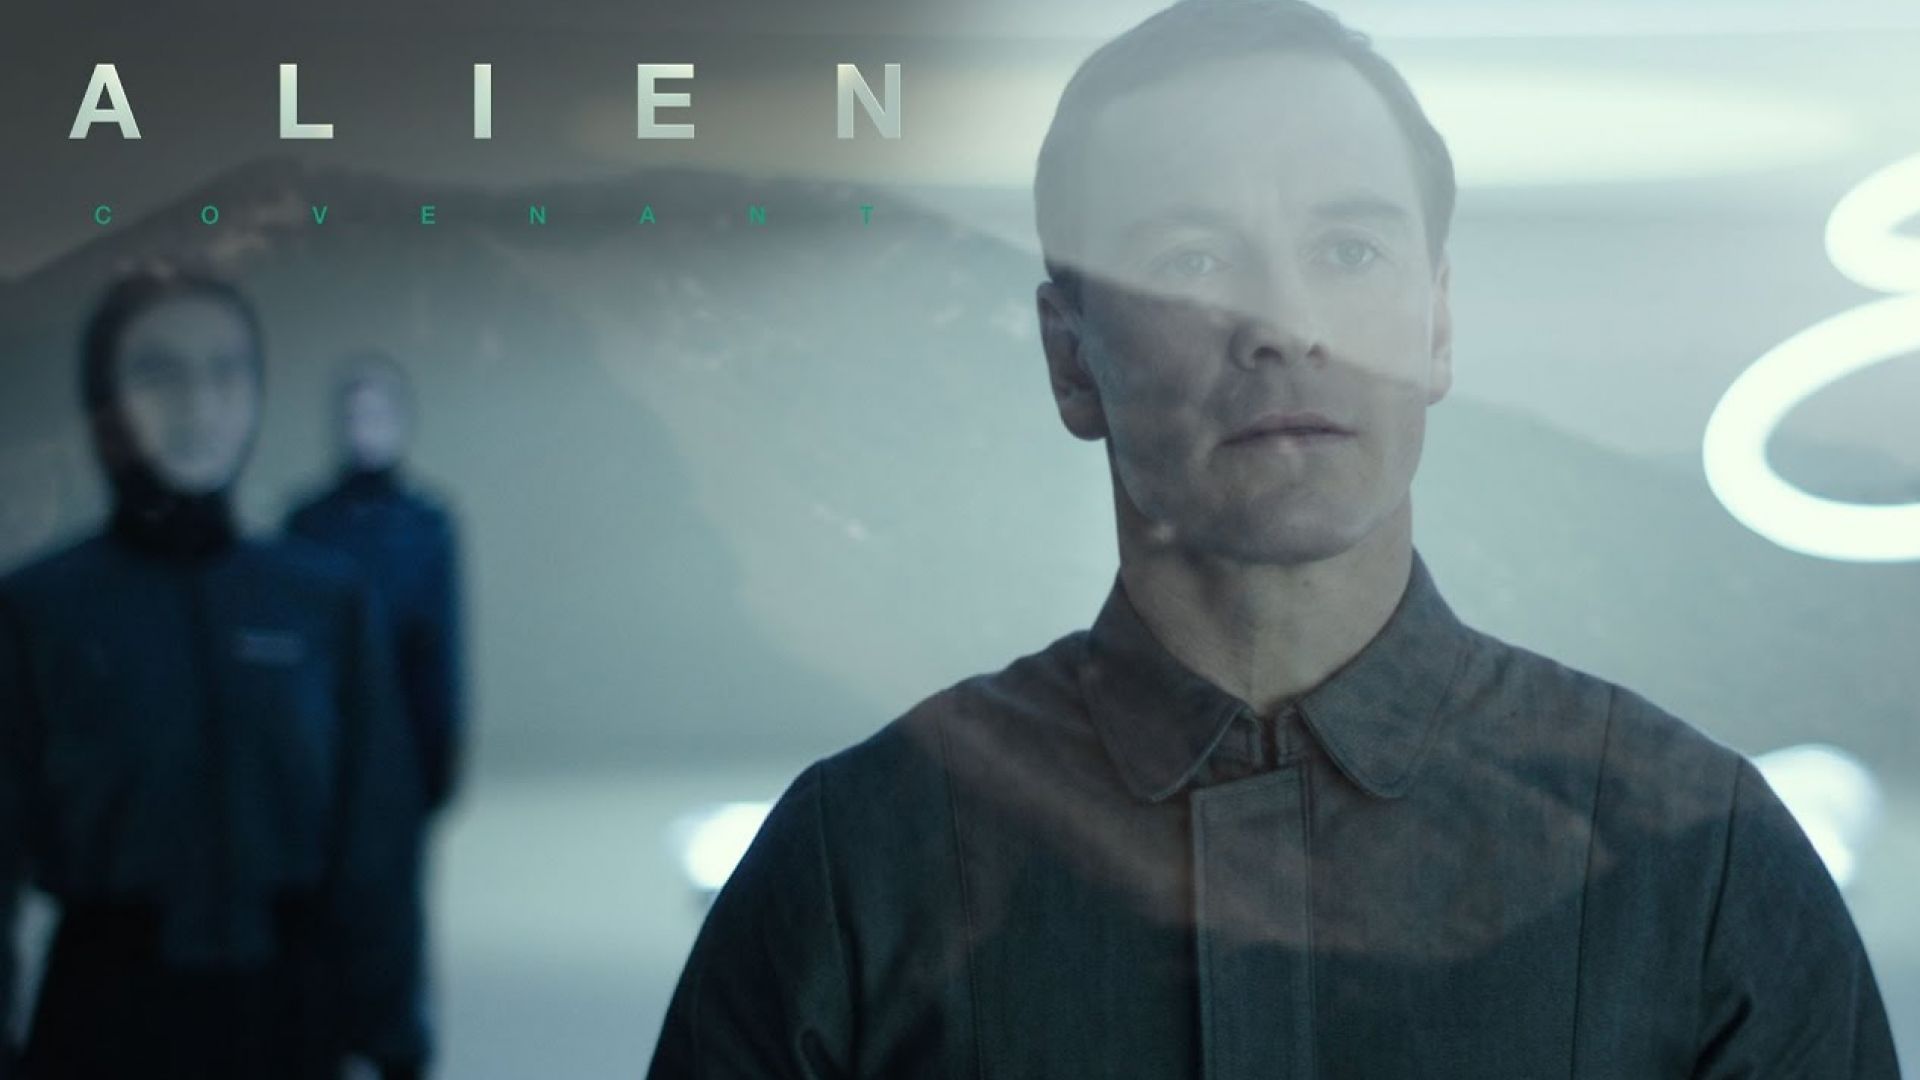 New video from &#039;Alien: Covenant&#039; introduces &#039;Walter&#039;